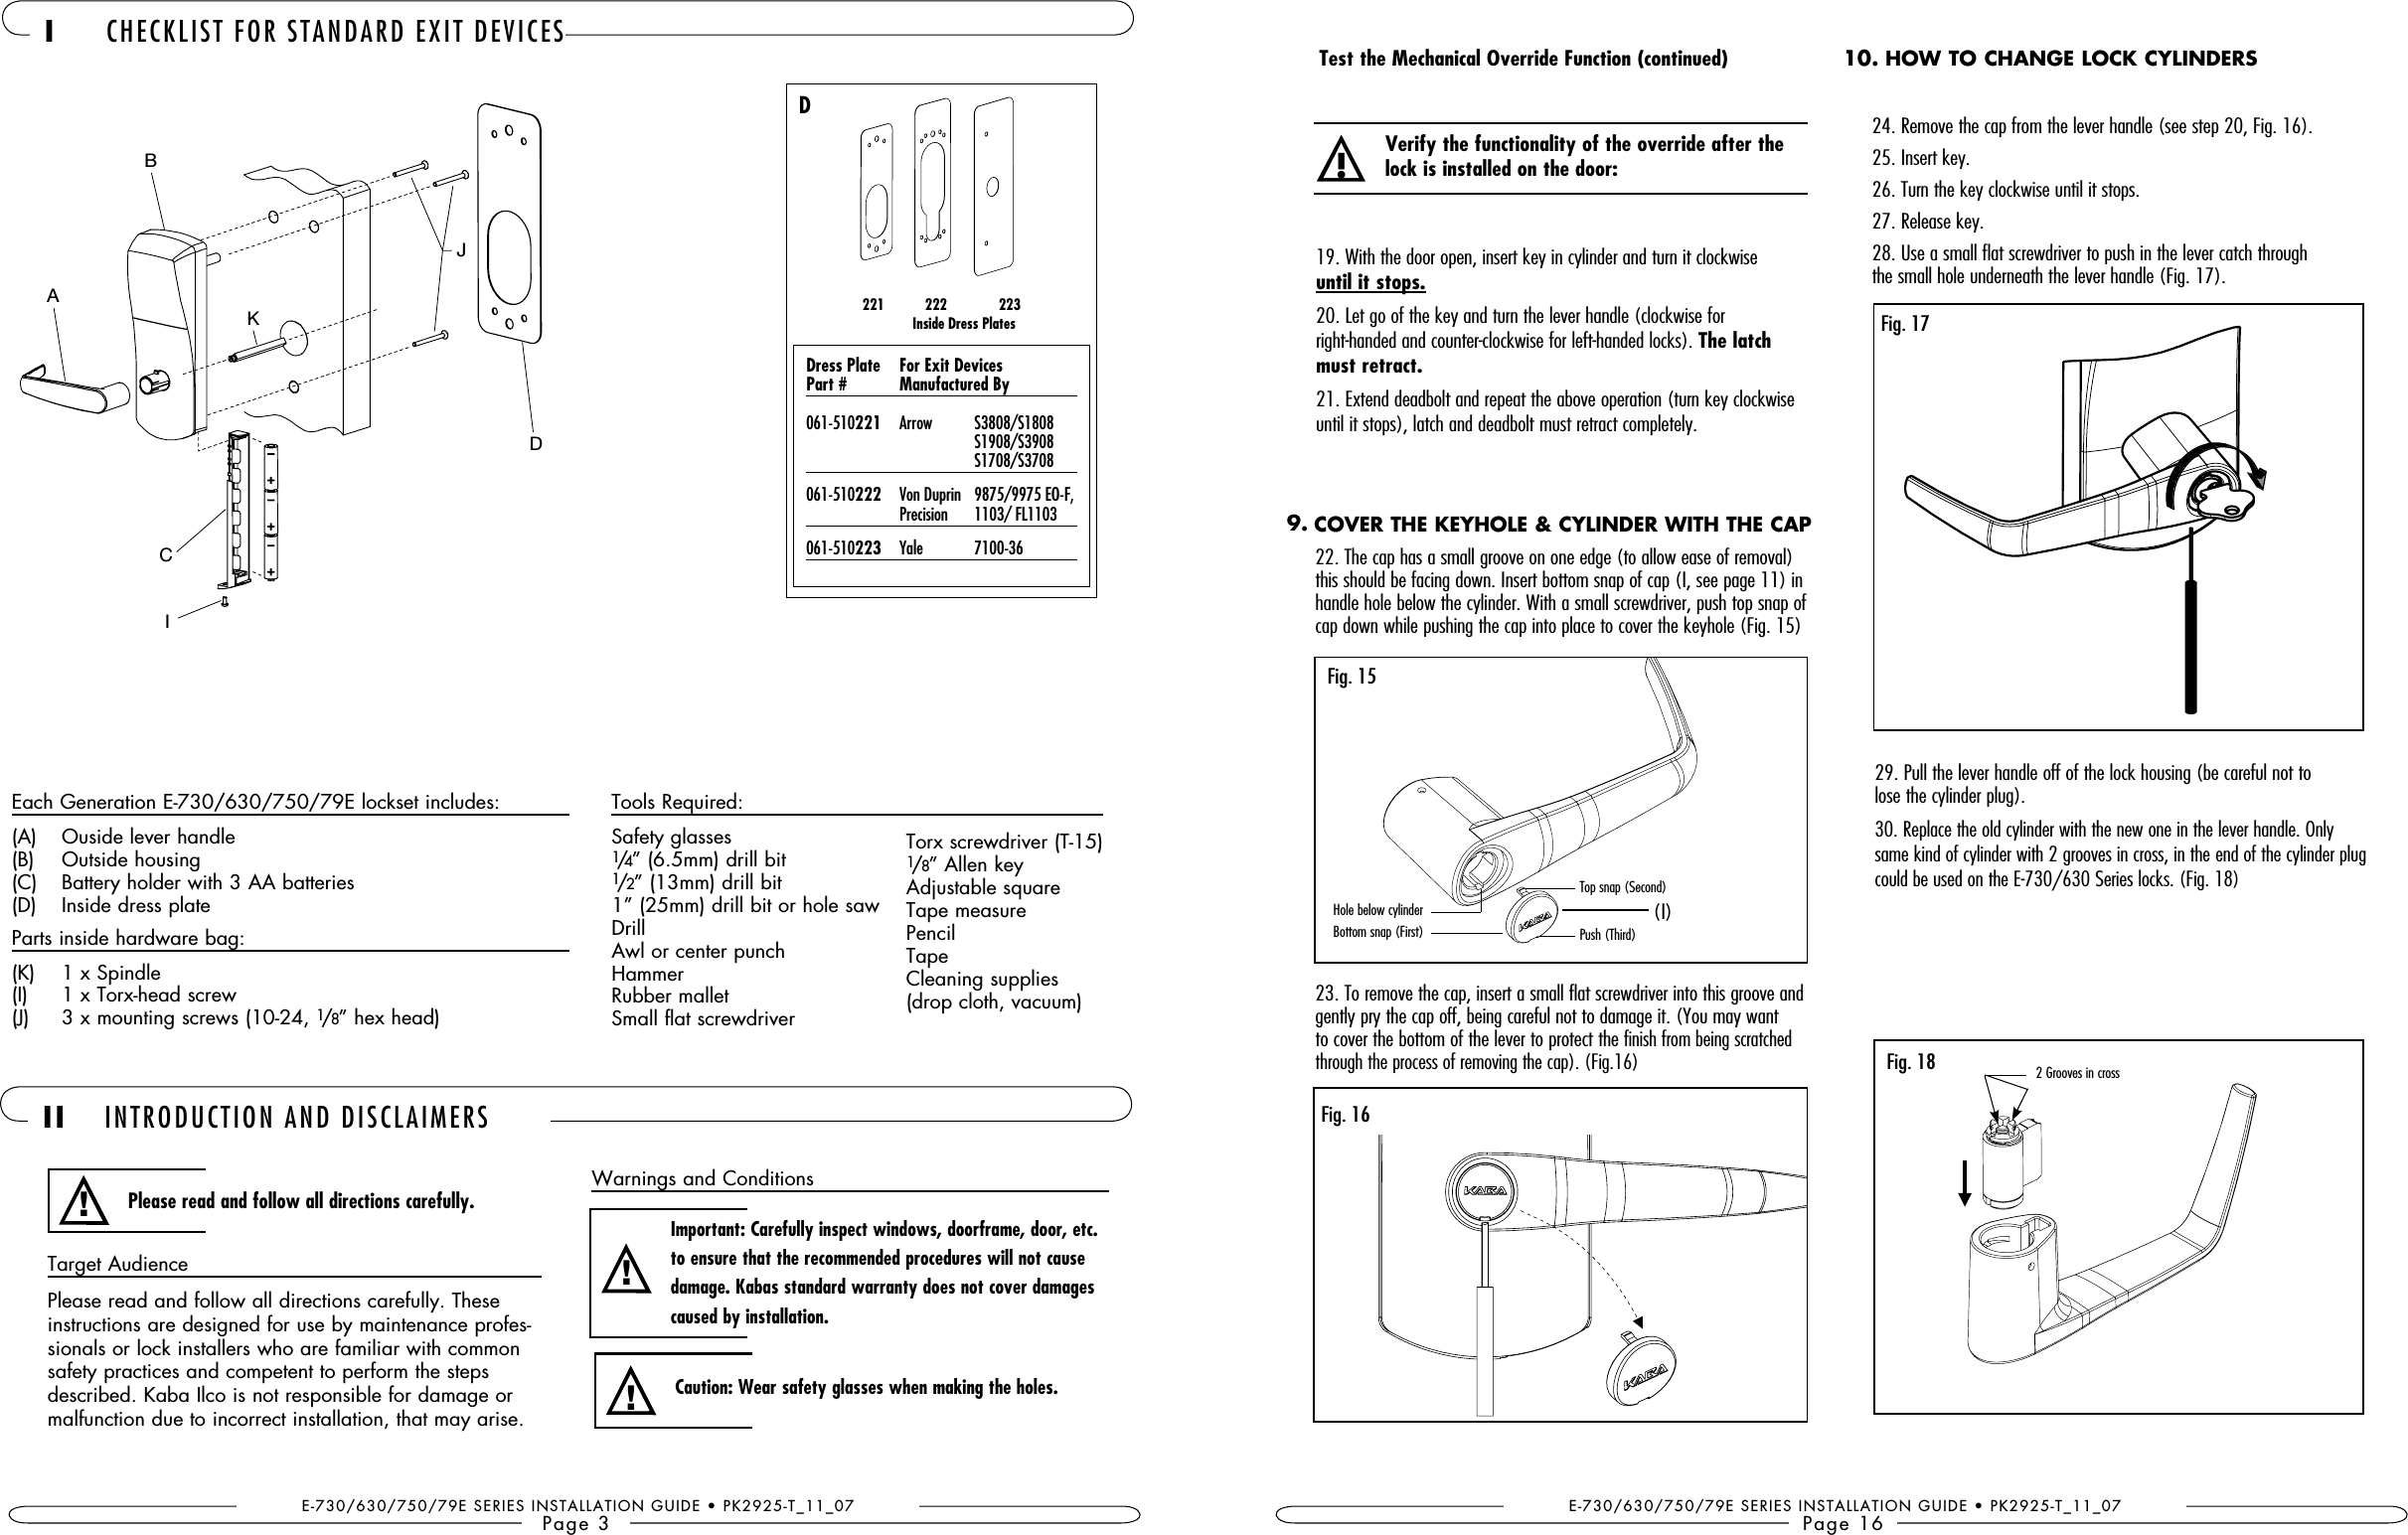 E-730/630/750/79E SERIES INSTALLATION GUIDE • PK2925-T_11_07Page 3Target AudiencePlease read and follow all directions carefully. These instructions are designed for use by maintenance profes-sionals or lock installers who are familiar with common safety practices and competent to perform the steps described. Kaba Ilco is not responsible for damage or malfunction due to incorrect installation, that may arise. II INTRODUCTION AND DISCLAIMERSPlease read and follow all directions carefully.!Important: Carefully inspect windows, doorframe, door, etc. to ensure that the recommended procedures will not cause caused by installation.!Caution: Wear safety glasses when making the holes.!  I CHECKLIST FOR STANDARD EXIT DEVICESEach Generation E-730/630/750/79E lockset includes:(A)  Ouside lever handle(B)  Outside housing(C)  Battery holder with 3 AA batteries(D)  Inside dress plateParts inside hardware bag:(K)  1 x Spindle(I)   1 x Torx-head screw(J)  3 x mounting screws (10-24, 1/8” hex head)Tools Required:Safety glasses1/4” (6.5mm) drill bit1/2” (13mm) drill bit1” (25mm) drill bit or hole sawDrillAwl or center punchHammer Rubber malletSmall flat screwdriverTorx screwdriver (T-15)1/8” Allen keyAdjustable squareTape measurePencilTapeCleaning supplies (drop cloth, vacuum)221           222              223                  Inside Dress PlatesD  Part #  Manufactured By 061-510221  Arrow  S3808/S1808     S1908/S3908     S1708/S3708061-510222   Von Duprin   9875/9975 EO-F,  Precision   1103/ FL1103061-510223   Yale   7100-36Warnings and ConditionsBACIKJDE-730/630/750/79E SERIES INSTALLATION GUIDE • PK2925-T_11_07Page 1622. The cap has a small groove on one edge (to allow ease of removal) this should be facing down. Insert bottom snap of cap (I, see page 11) in handle hole below the cylinder. With a small screwdriver, push top snap of cap down while pushing the cap into place to cover the keyhole (Fig. 15)23. To remove the cap, insert a small flat screwdriver into this groove and gently pry the cap off, being careful not to damage it. (You may want to cover the bottom of the lever to protect the finish from being scratched through the process of removing the cap). (Fig.16)19. With the door open, insert key in cylinder and turn it clockwise  until it stops.20. Let go of the key and turn the lever handle (clockwise for  right-handed and counter-clockwise for left-handed locks). The latch must retract.21. Extend deadbolt and repeat the above operation (turn key clockwise until it stops), latch and deadbolt must retract completely.Test the Mechanical Override Function (continued)! lock is installed on the door:Fig. 16COVER THE KEYHOLE &amp; CYLINDER WITH THE CAP9.HOW TO CHANGE LOCK CYLINDERS10.Fig. 1724. Remove the cap from the lever handle (see step 20, Fig. 16).25. Insert key.26. Turn the key clockwise until it stops. 27. Release key.28. Use a small flat screwdriver to push in the lever catch through  the small hole underneath the lever handle (Fig. 17).29. Pull the lever handle off of the lock housing (be careful not to  lose the cylinder plug).30. Replace the old cylinder with the new one in the lever handle. Only same kind of cylinder with 2 grooves in cross, in the end of the cylinder plug could be used on the E-730/630 Series locks. (Fig. 18)Fig. 18 2 Grooves in crossFig. 15(I)Hole below cylinderBottom snap (First)Top snap (Second)Push (Third)